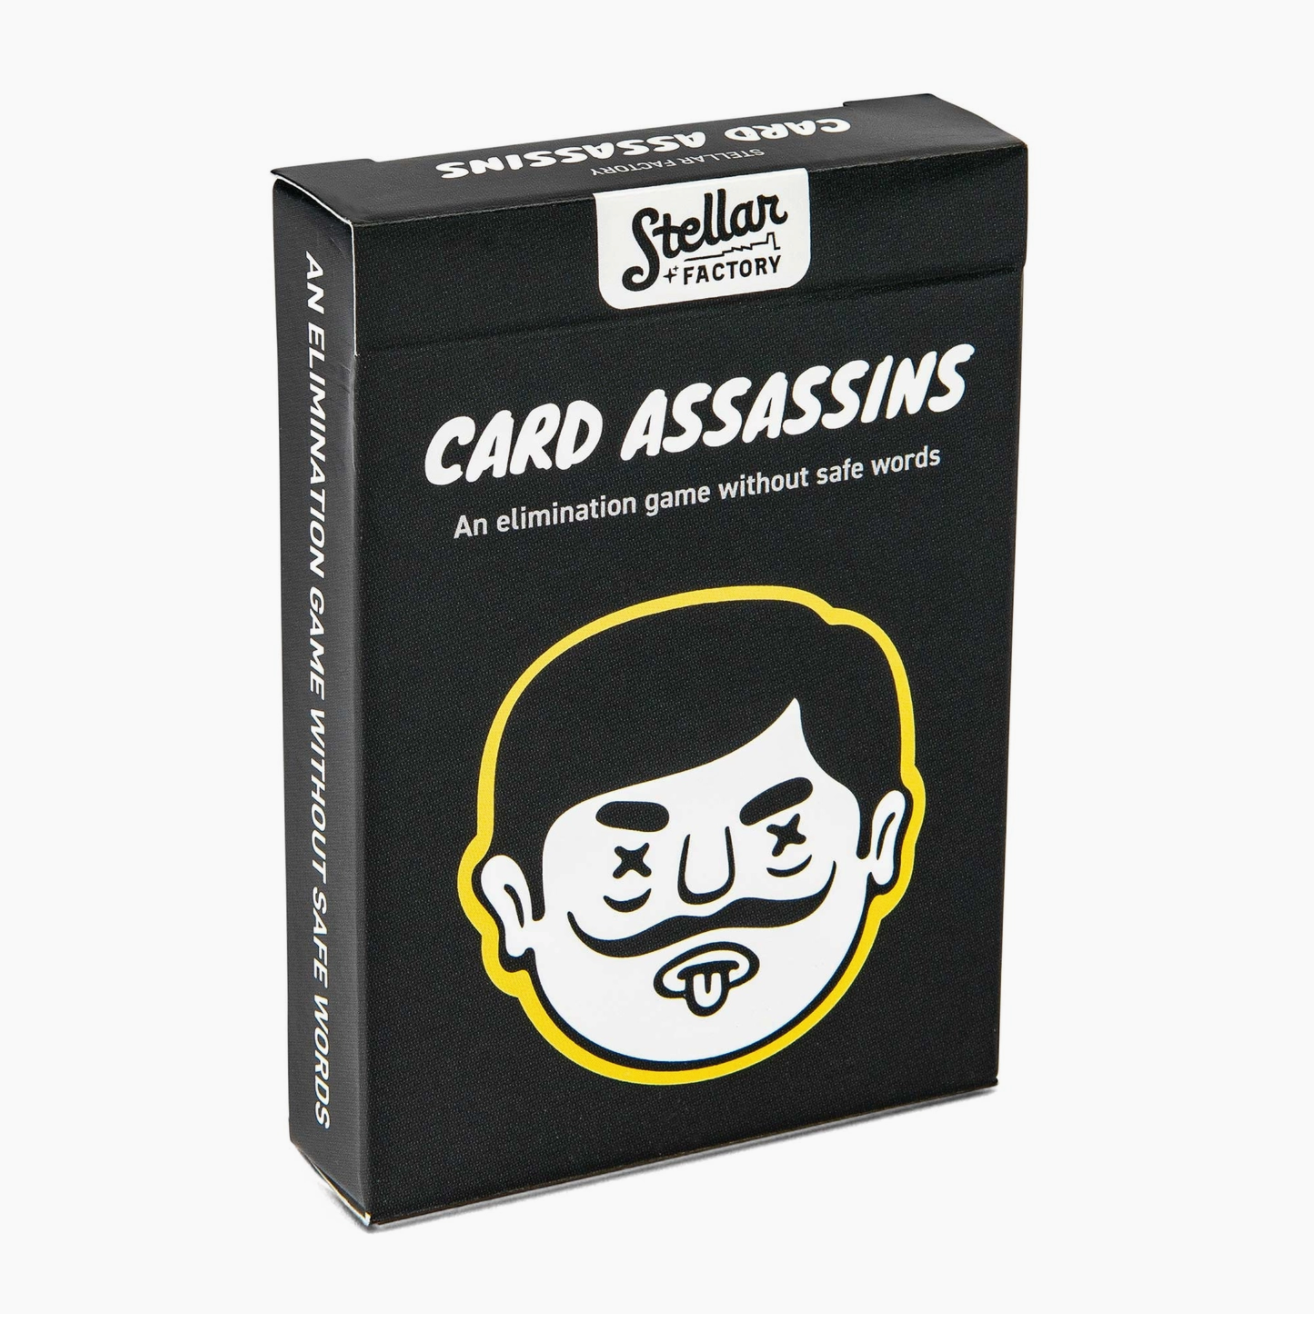 Card Assassins by Stellar Factory An Elimination game without safe words Le Monkey House Party Games